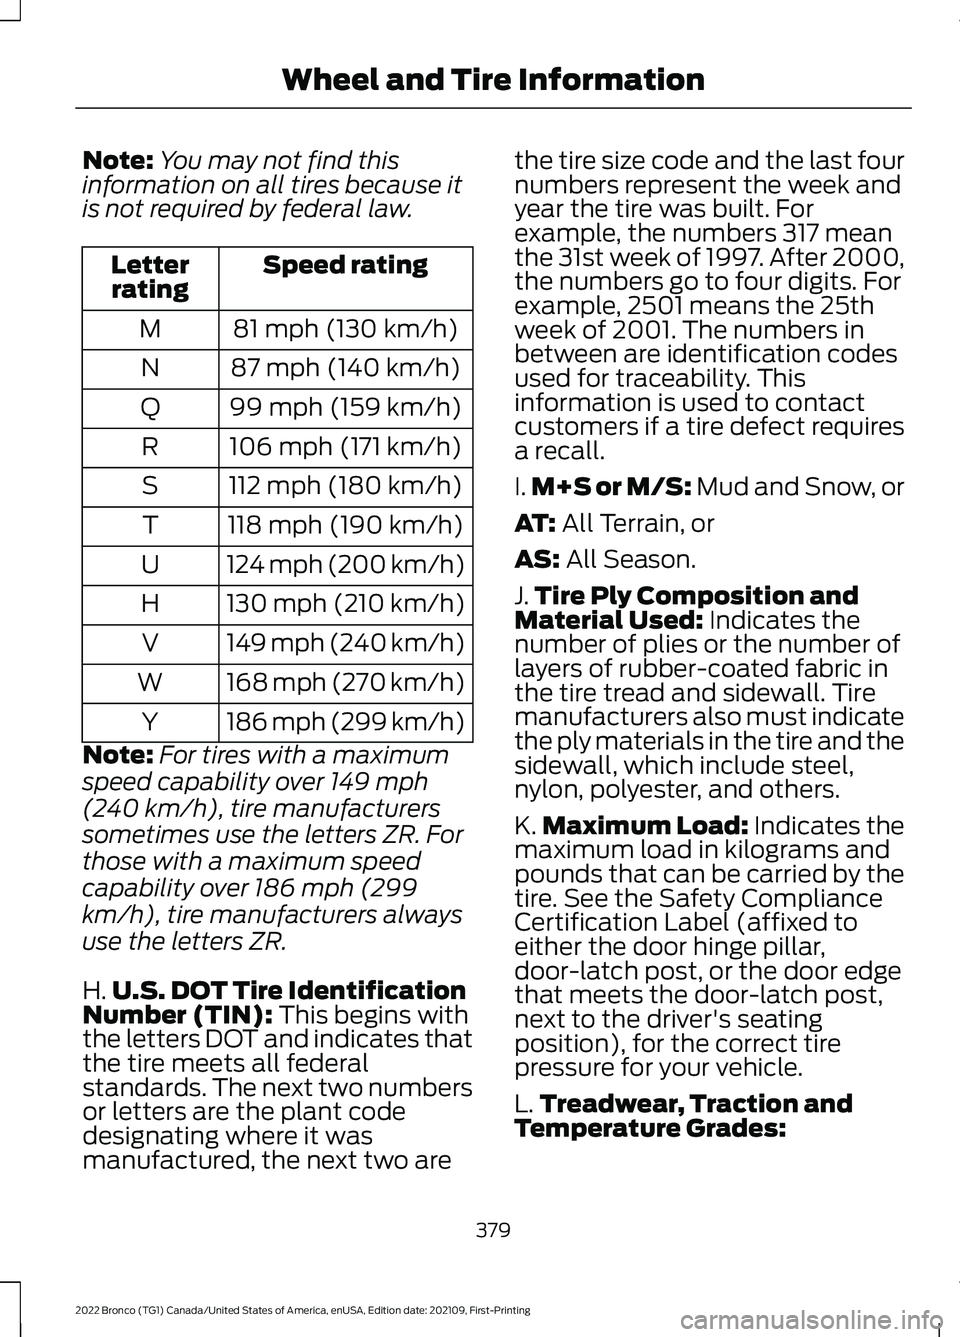 FORD BRONCO 2022 Service Manual Note:You may not find thisinformation on all tires because itis not required by federal law.
Speed ratingLetterrating
81 mph (130 km/h)M
87 mph (140 km/h)N
99 mph (159 km/h)Q
106 mph (171 km/h)R
112 m